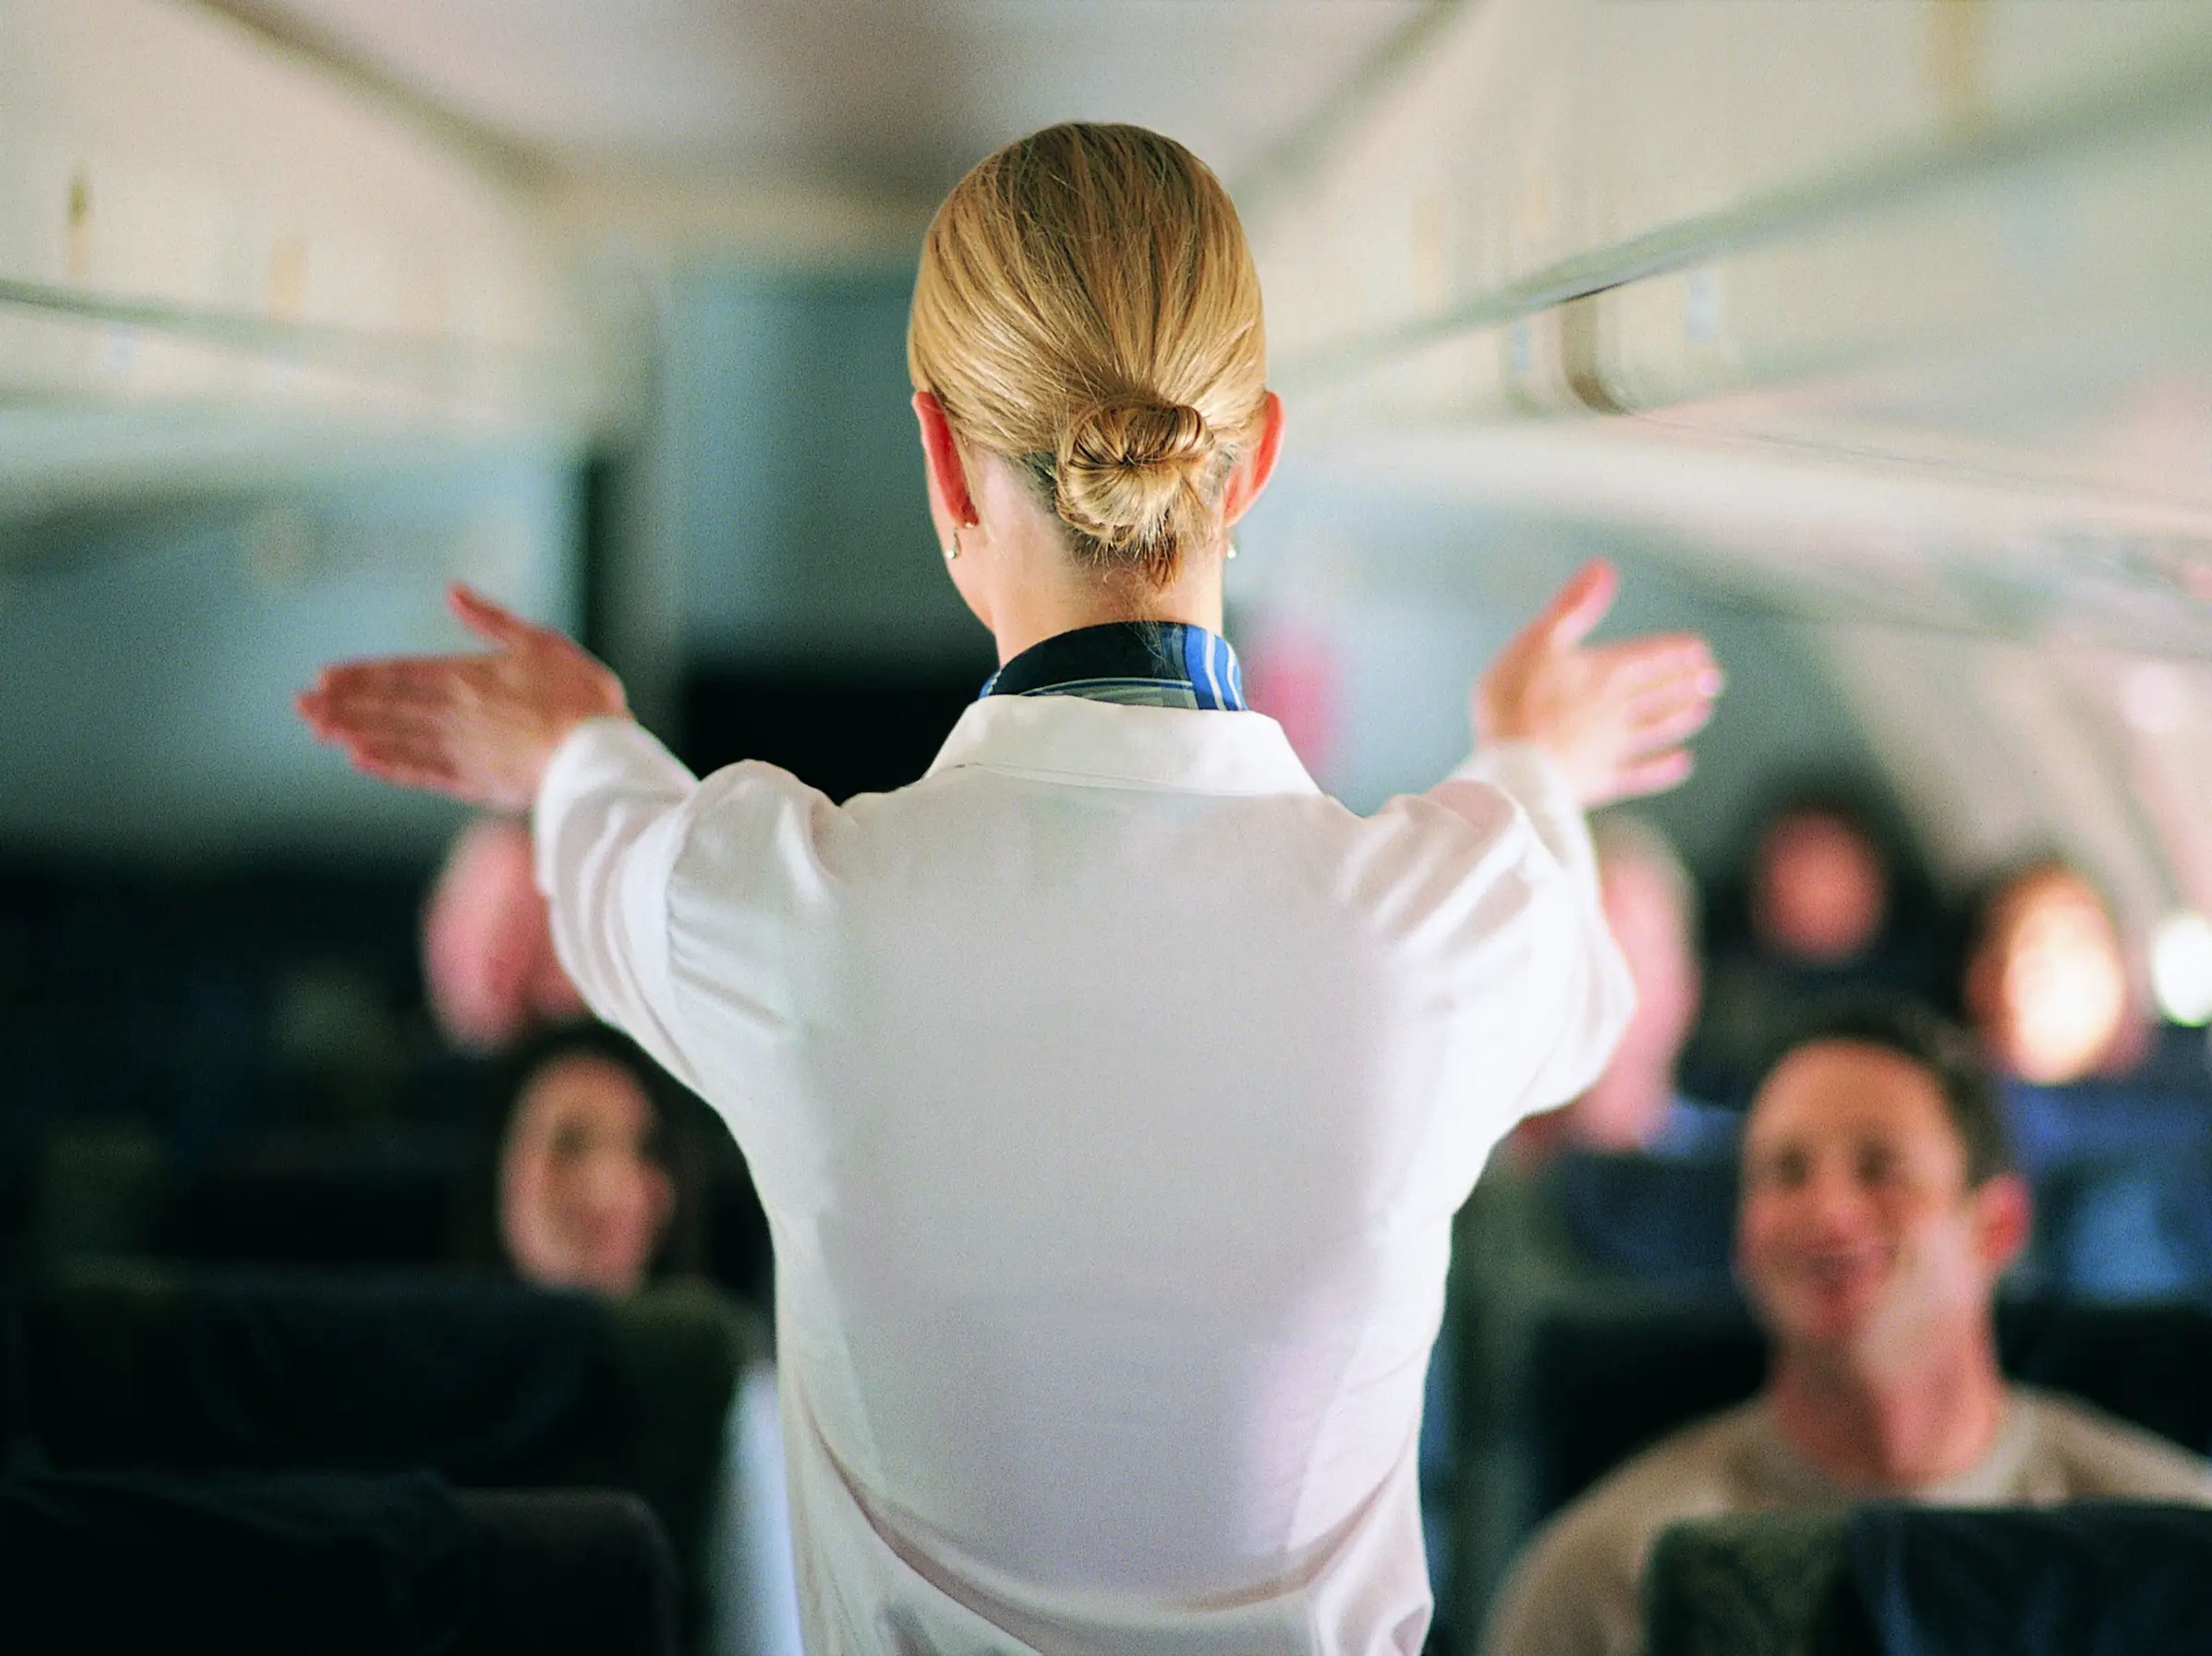 flight attendant standing in plane aisle with hands stretched in front of her